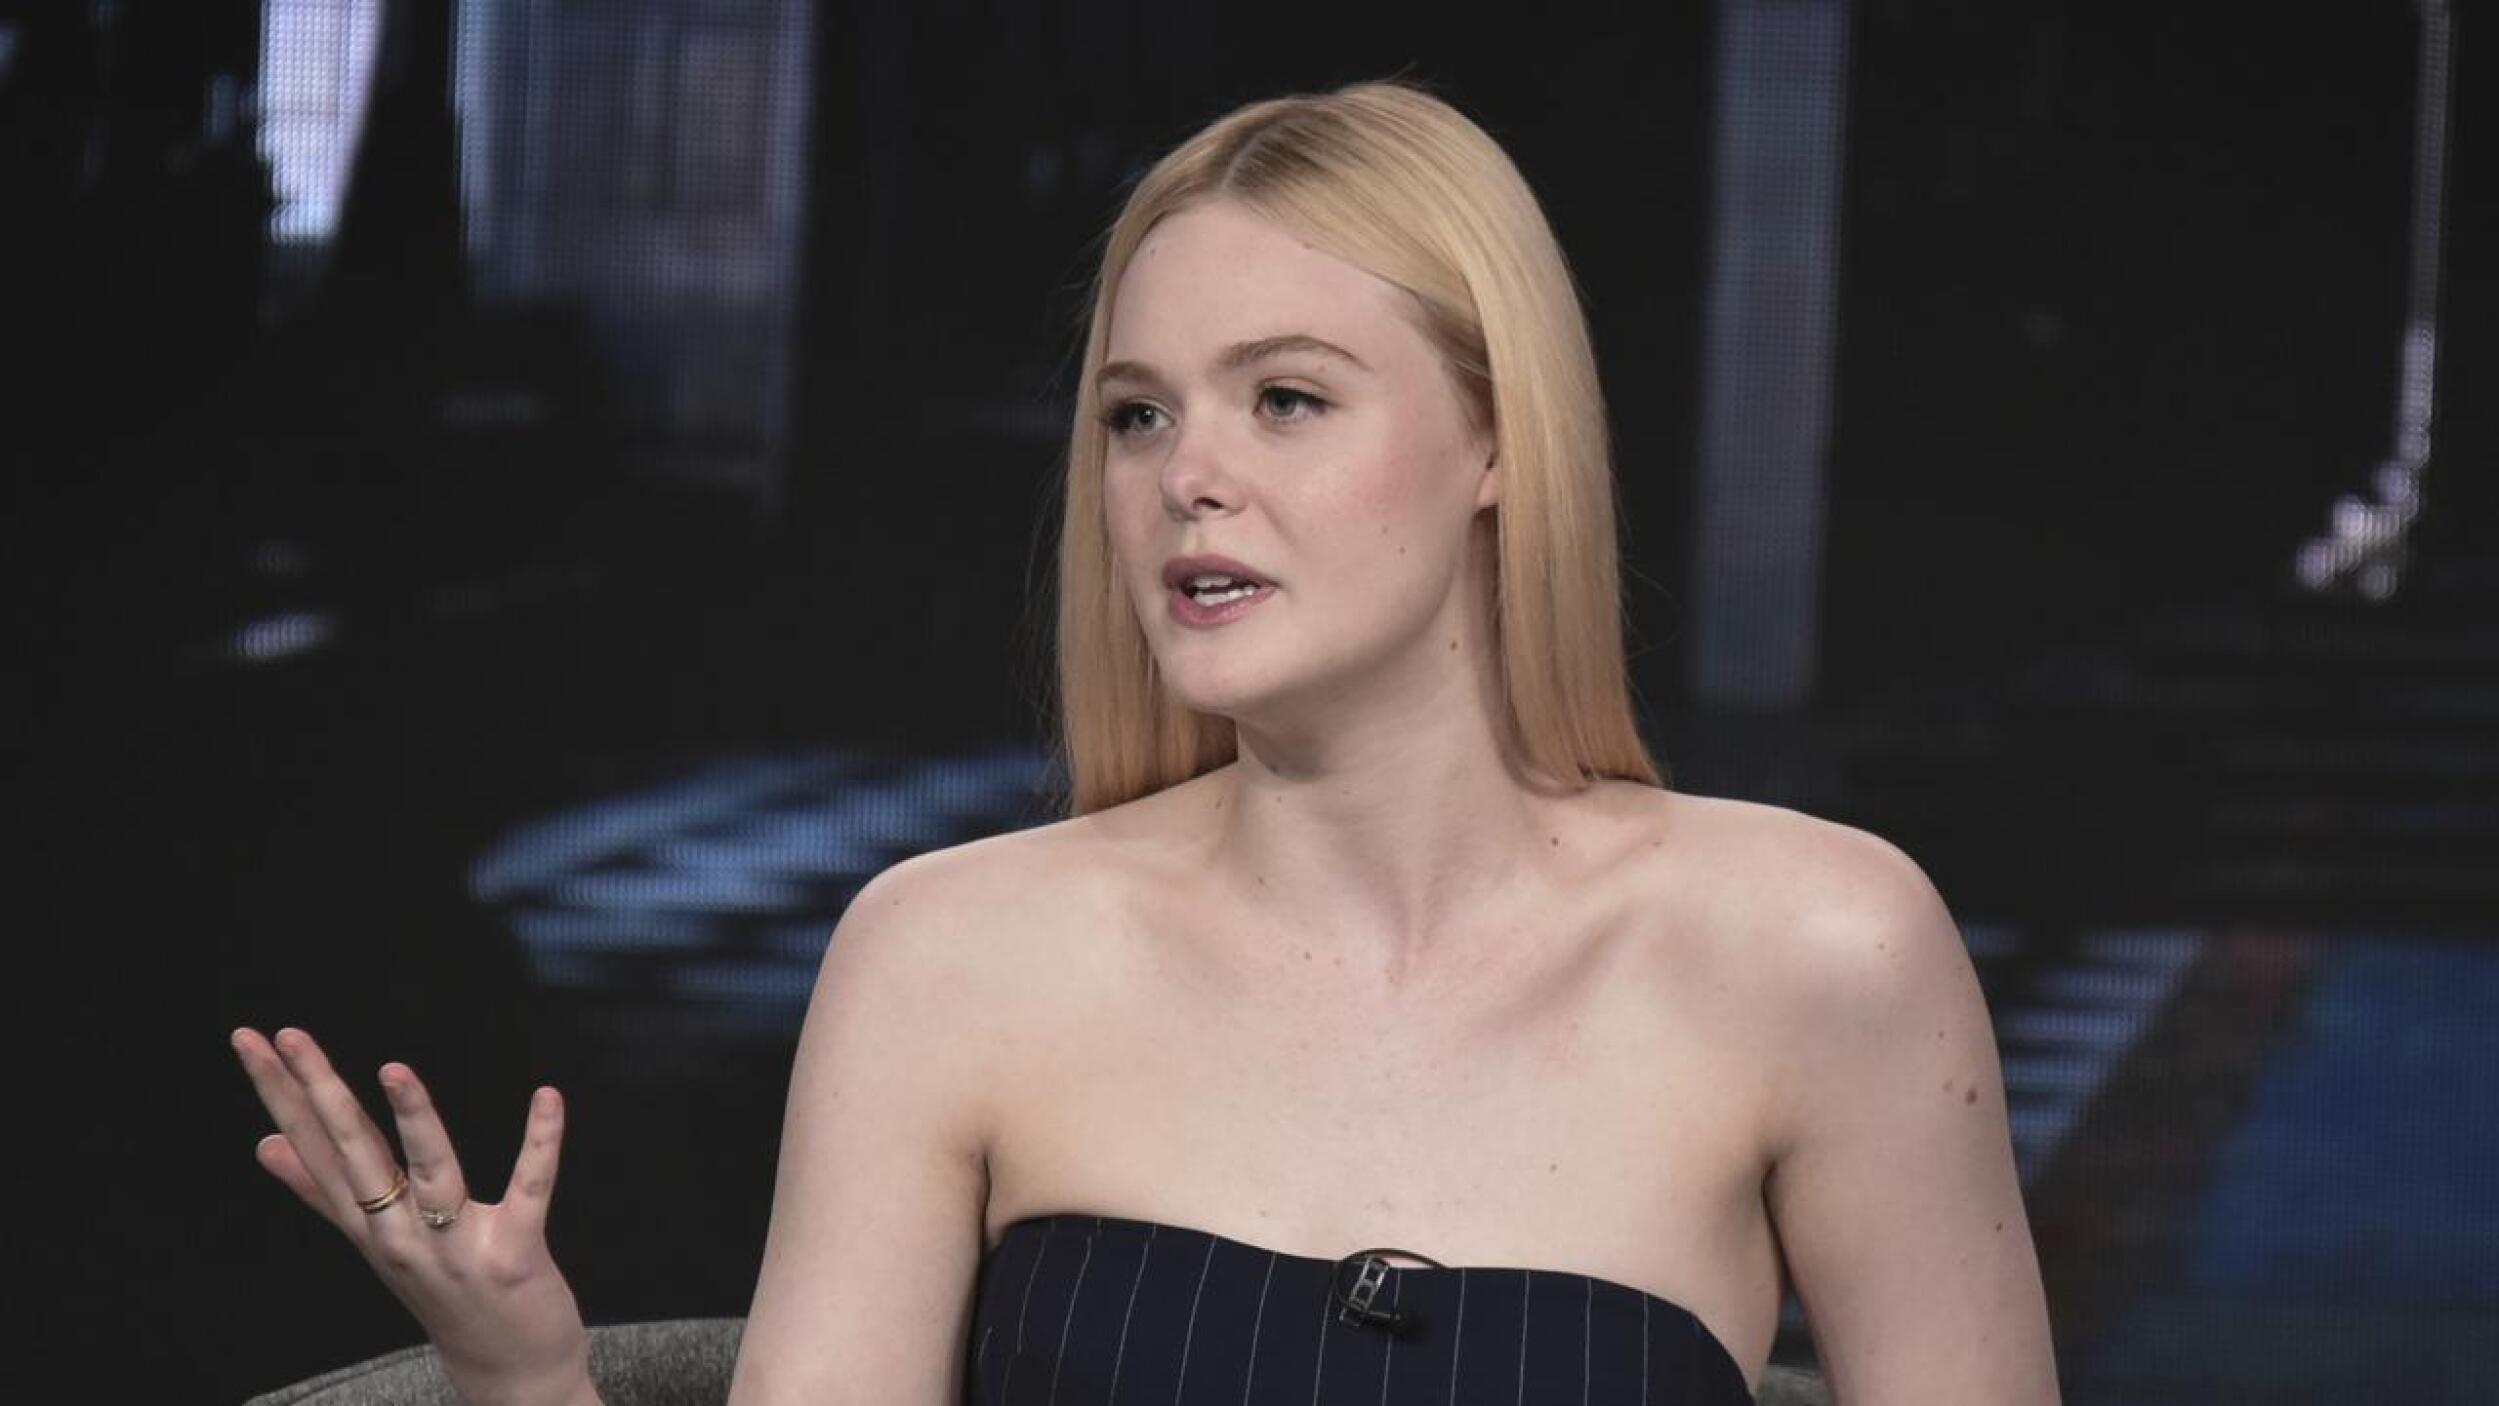 Elle Fanning Missed Out on Major Franchise Role Because of Low